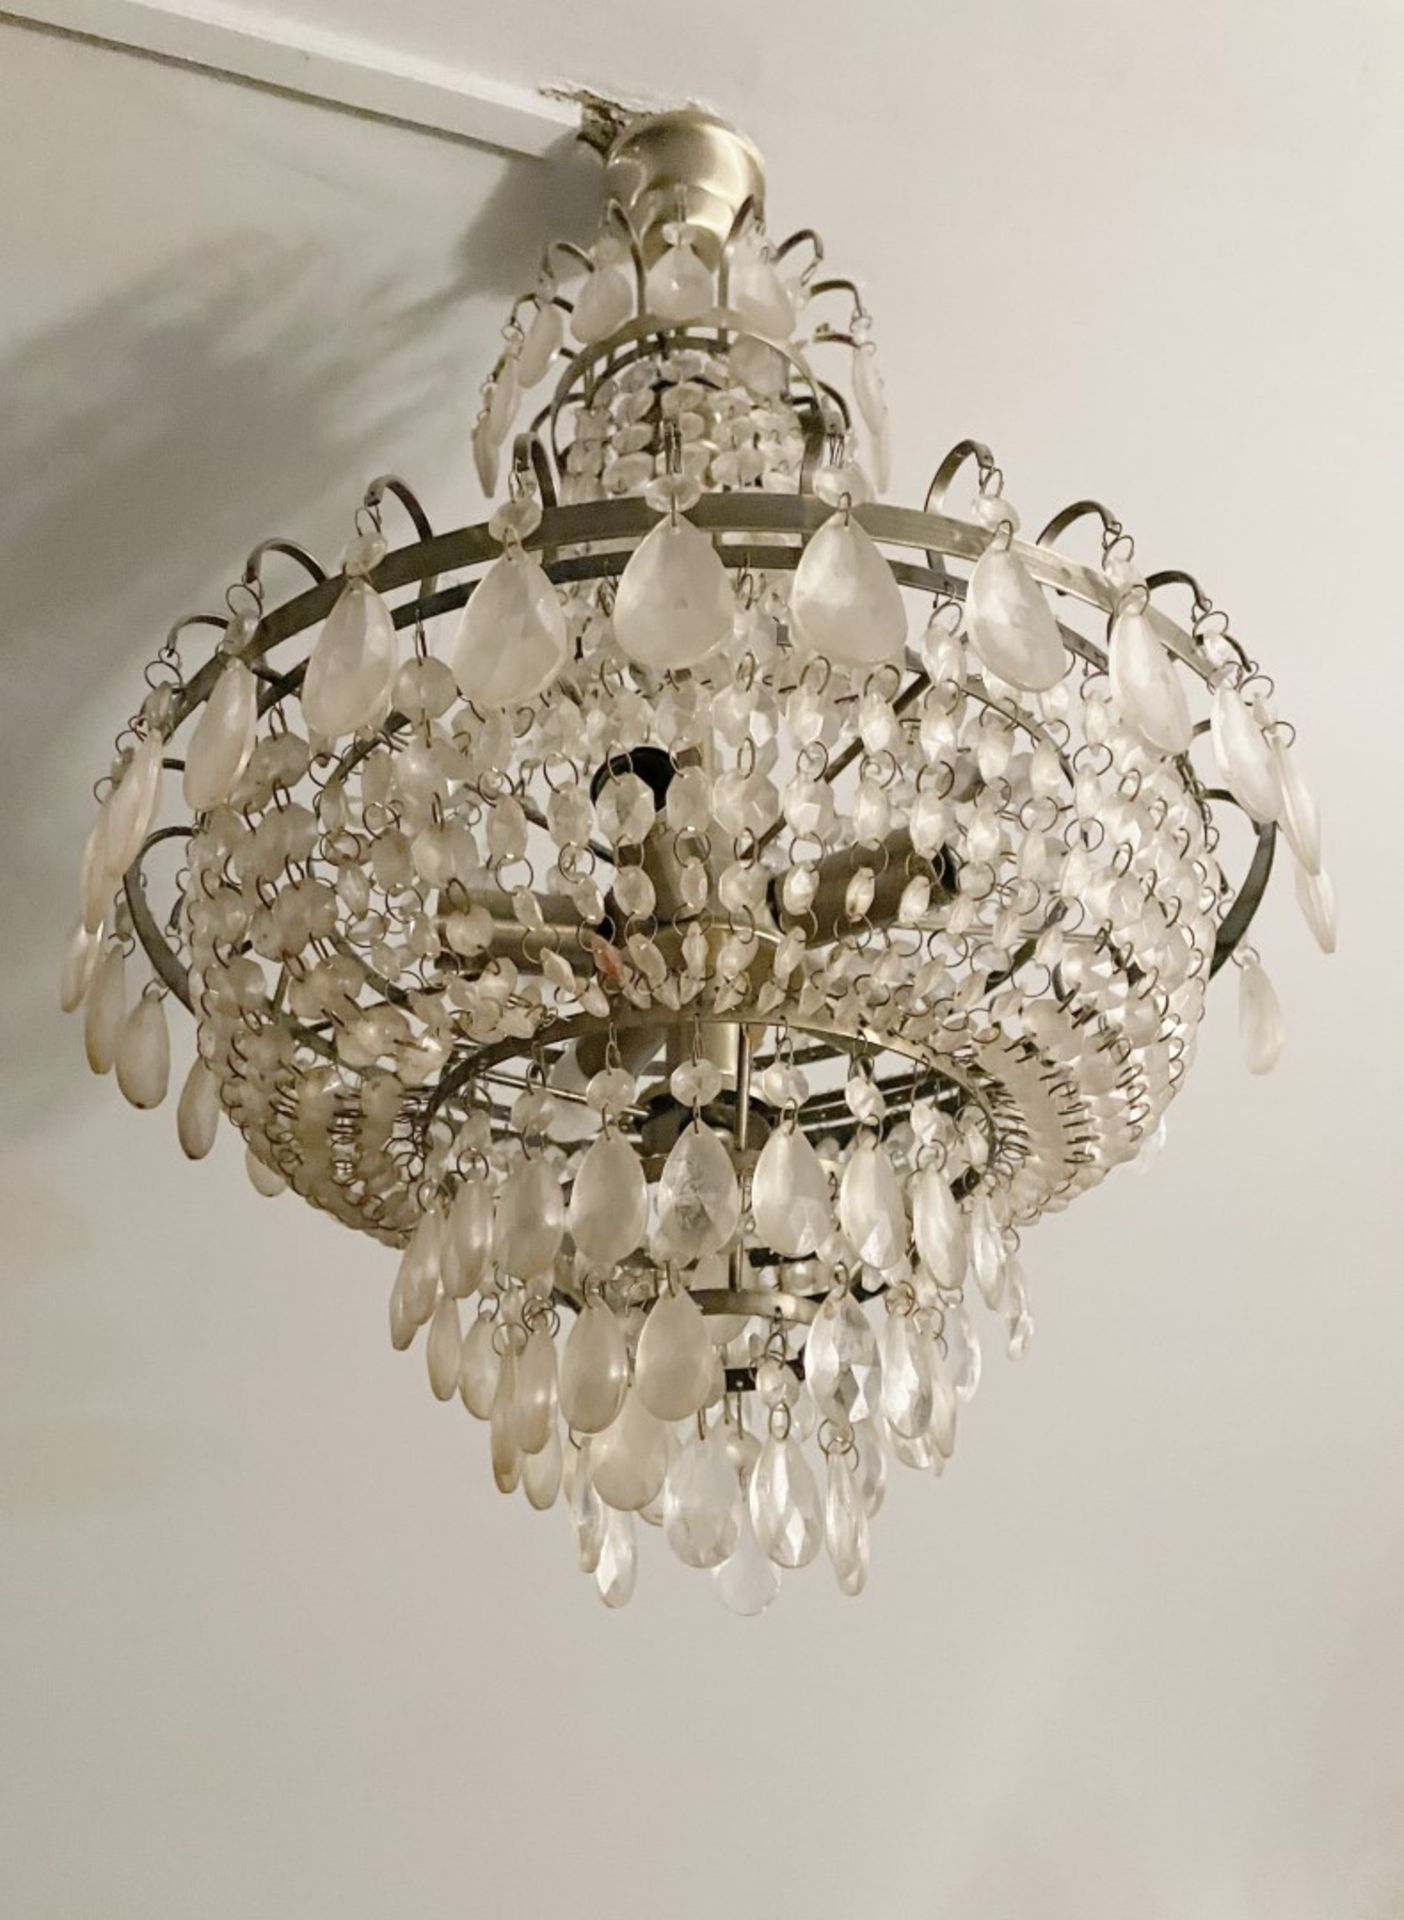 1 x Large Gustavian-style Chandelier Ceiling Pendant Light Adorned with Clear Droplets - Image 2 of 9